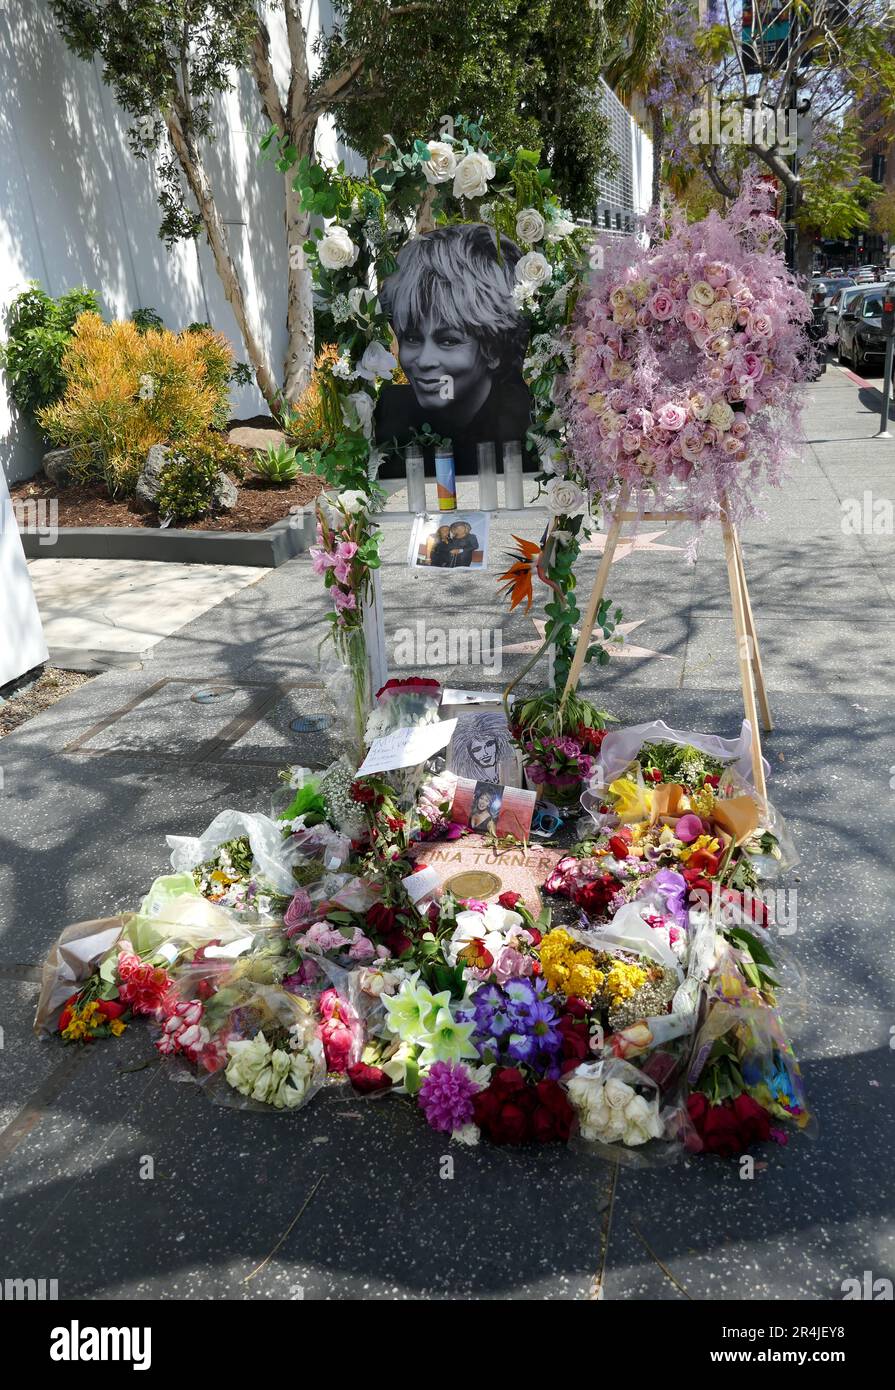 Los Angeles, California, USA 28th maggio 2023 Singer Tina Turner Hollywood Walk of Fame Star with Flowers and Memorial il 28 maggio 2023 a Los Angeles, California, USA. Foto di Barry King/Alamy Live News Foto Stock